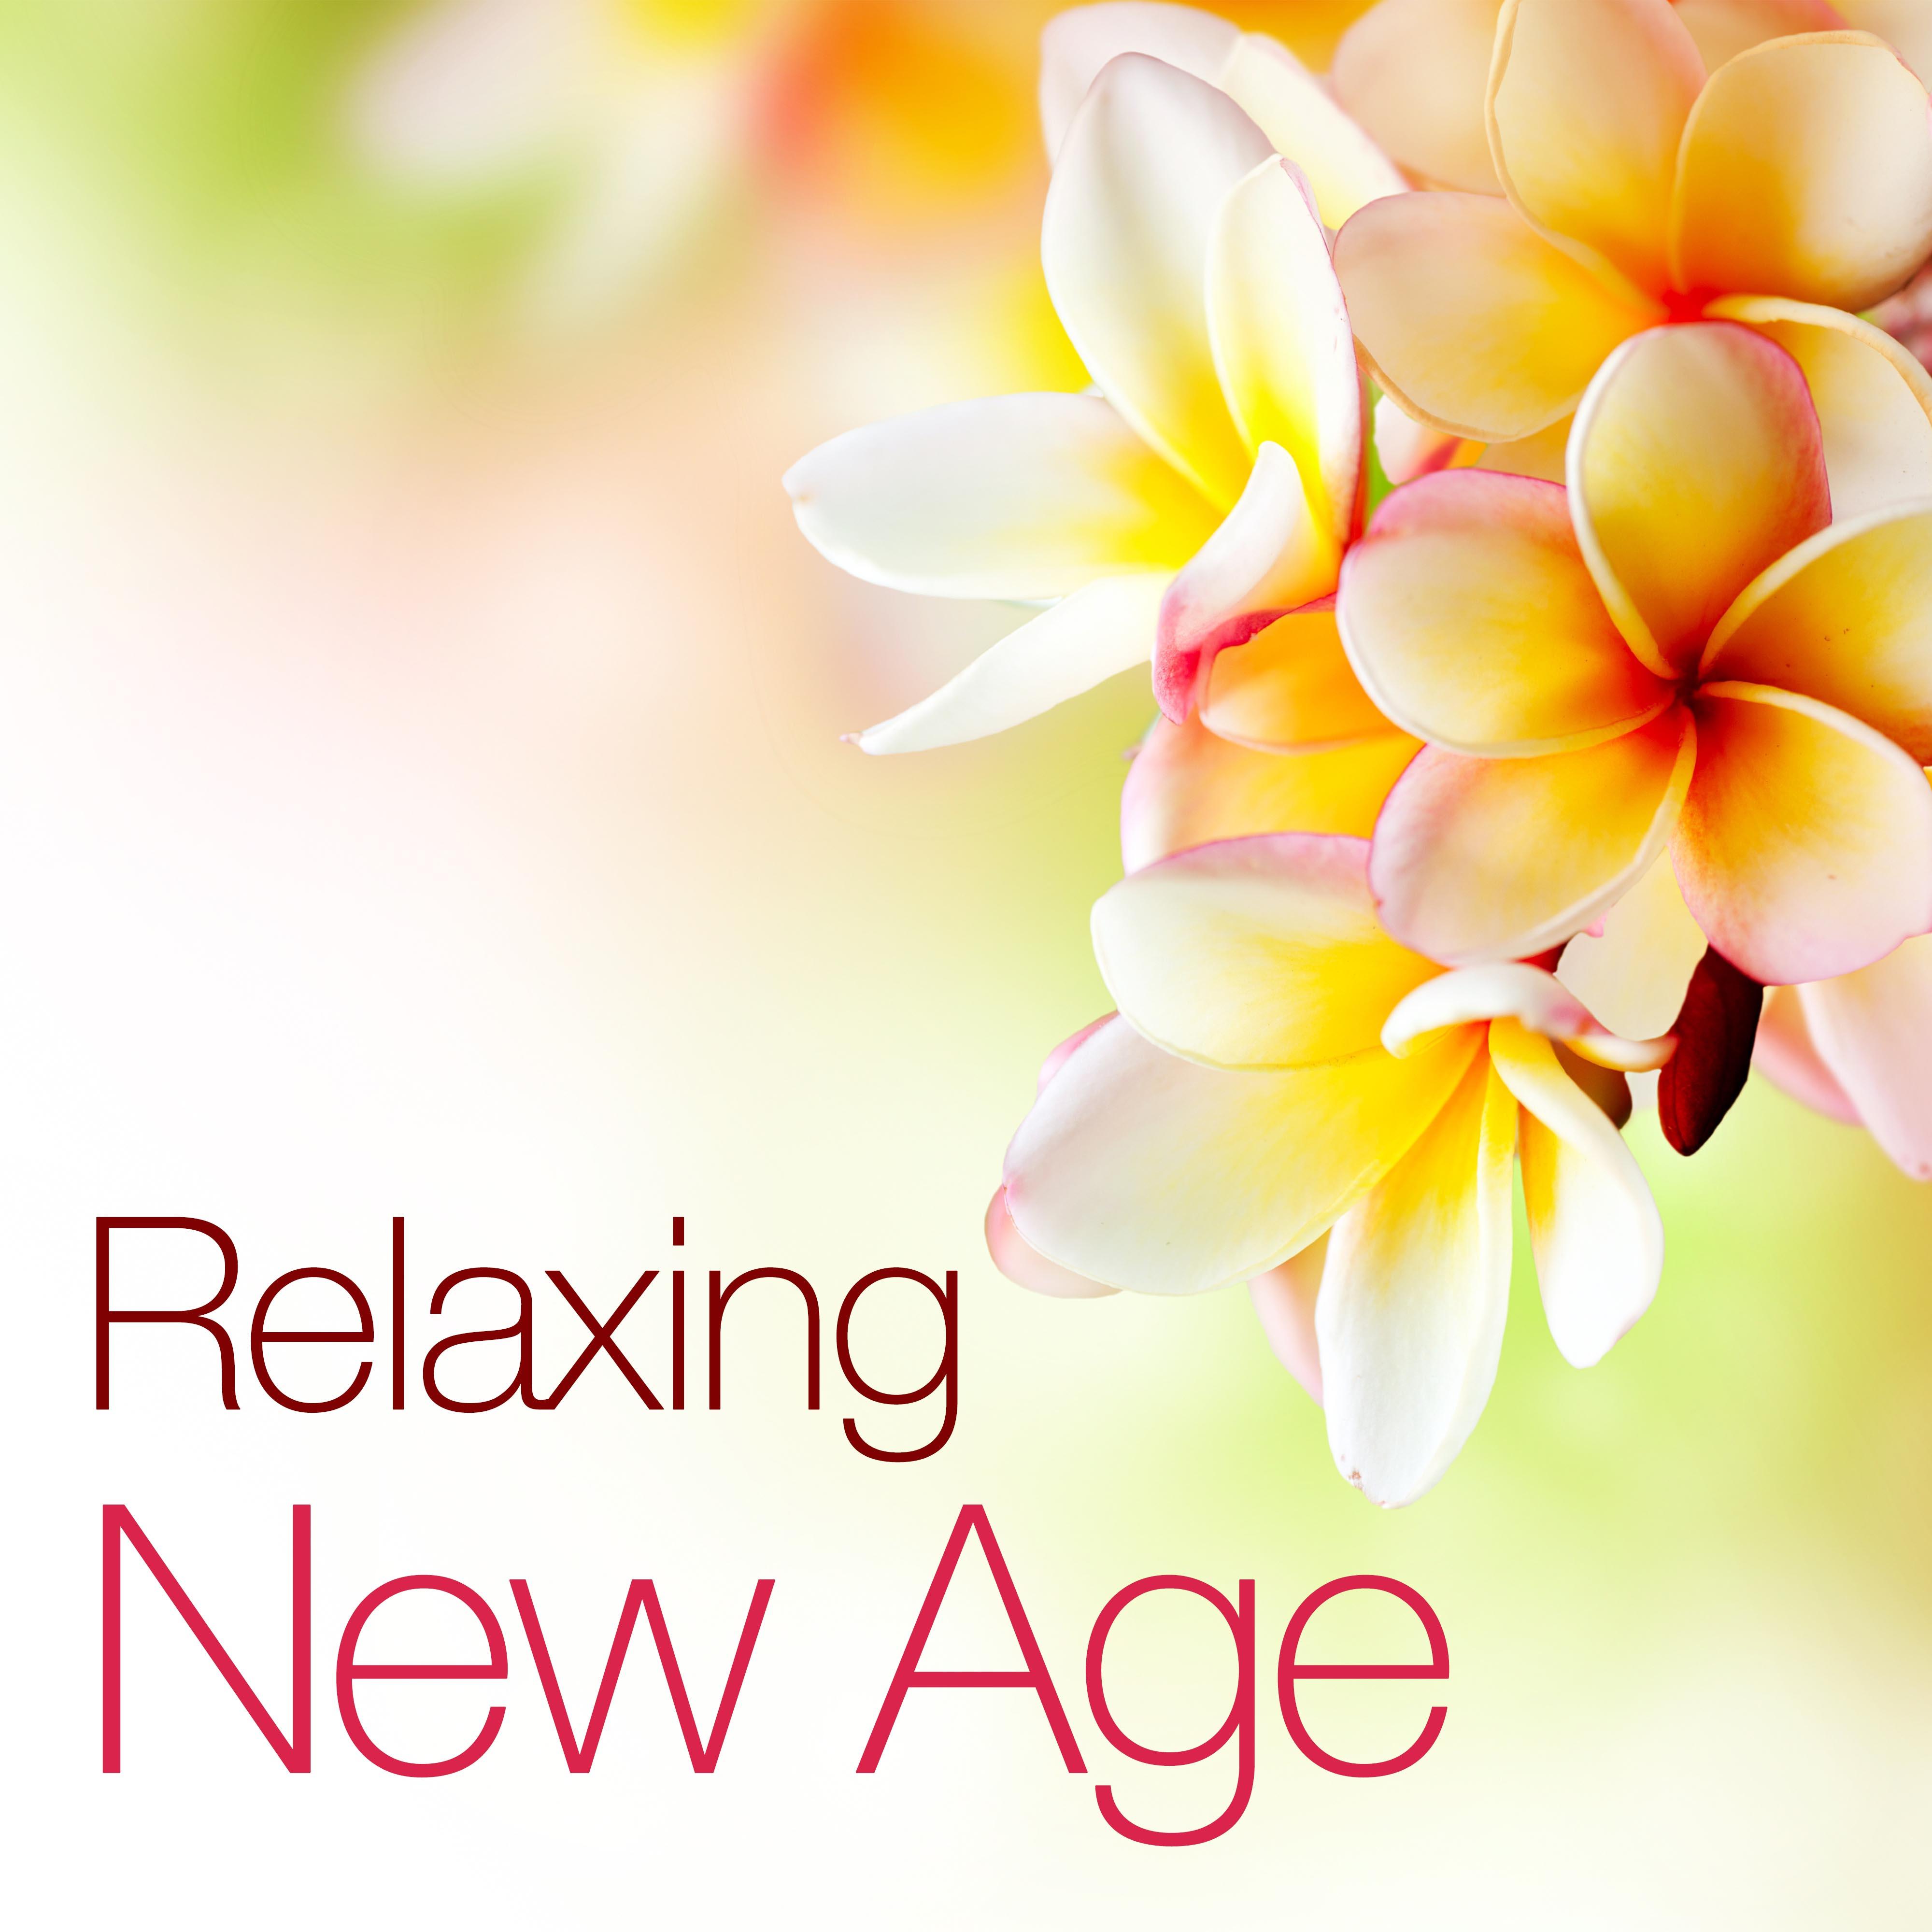 Relaxing New Age: Soothing New Age Vibes for Reiki, Meditation, Spa and Wellness Centers